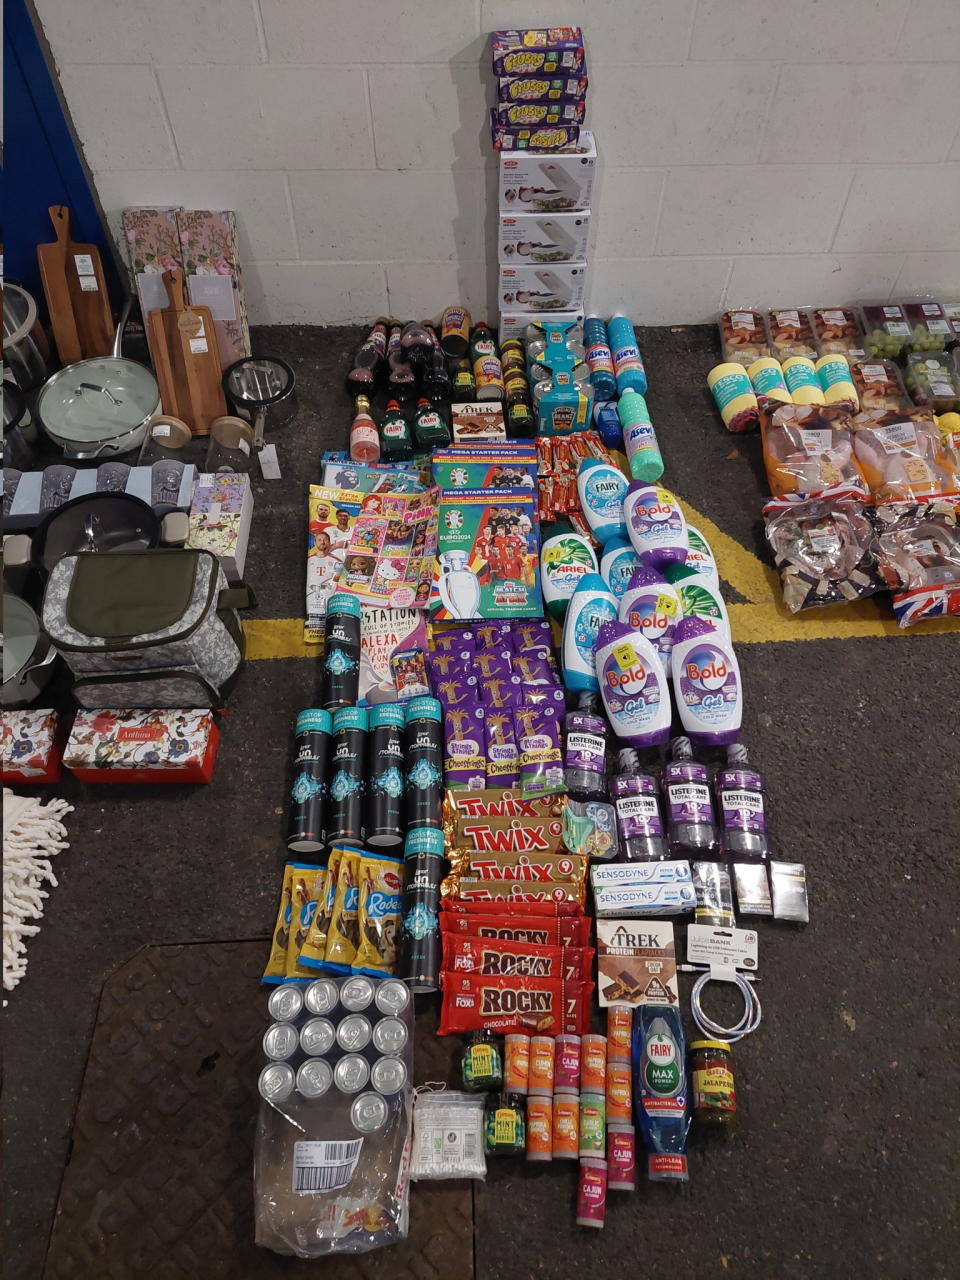 Stolen items included cosmetics, M&S food, pots, pans and chopping boards. (SWNS)